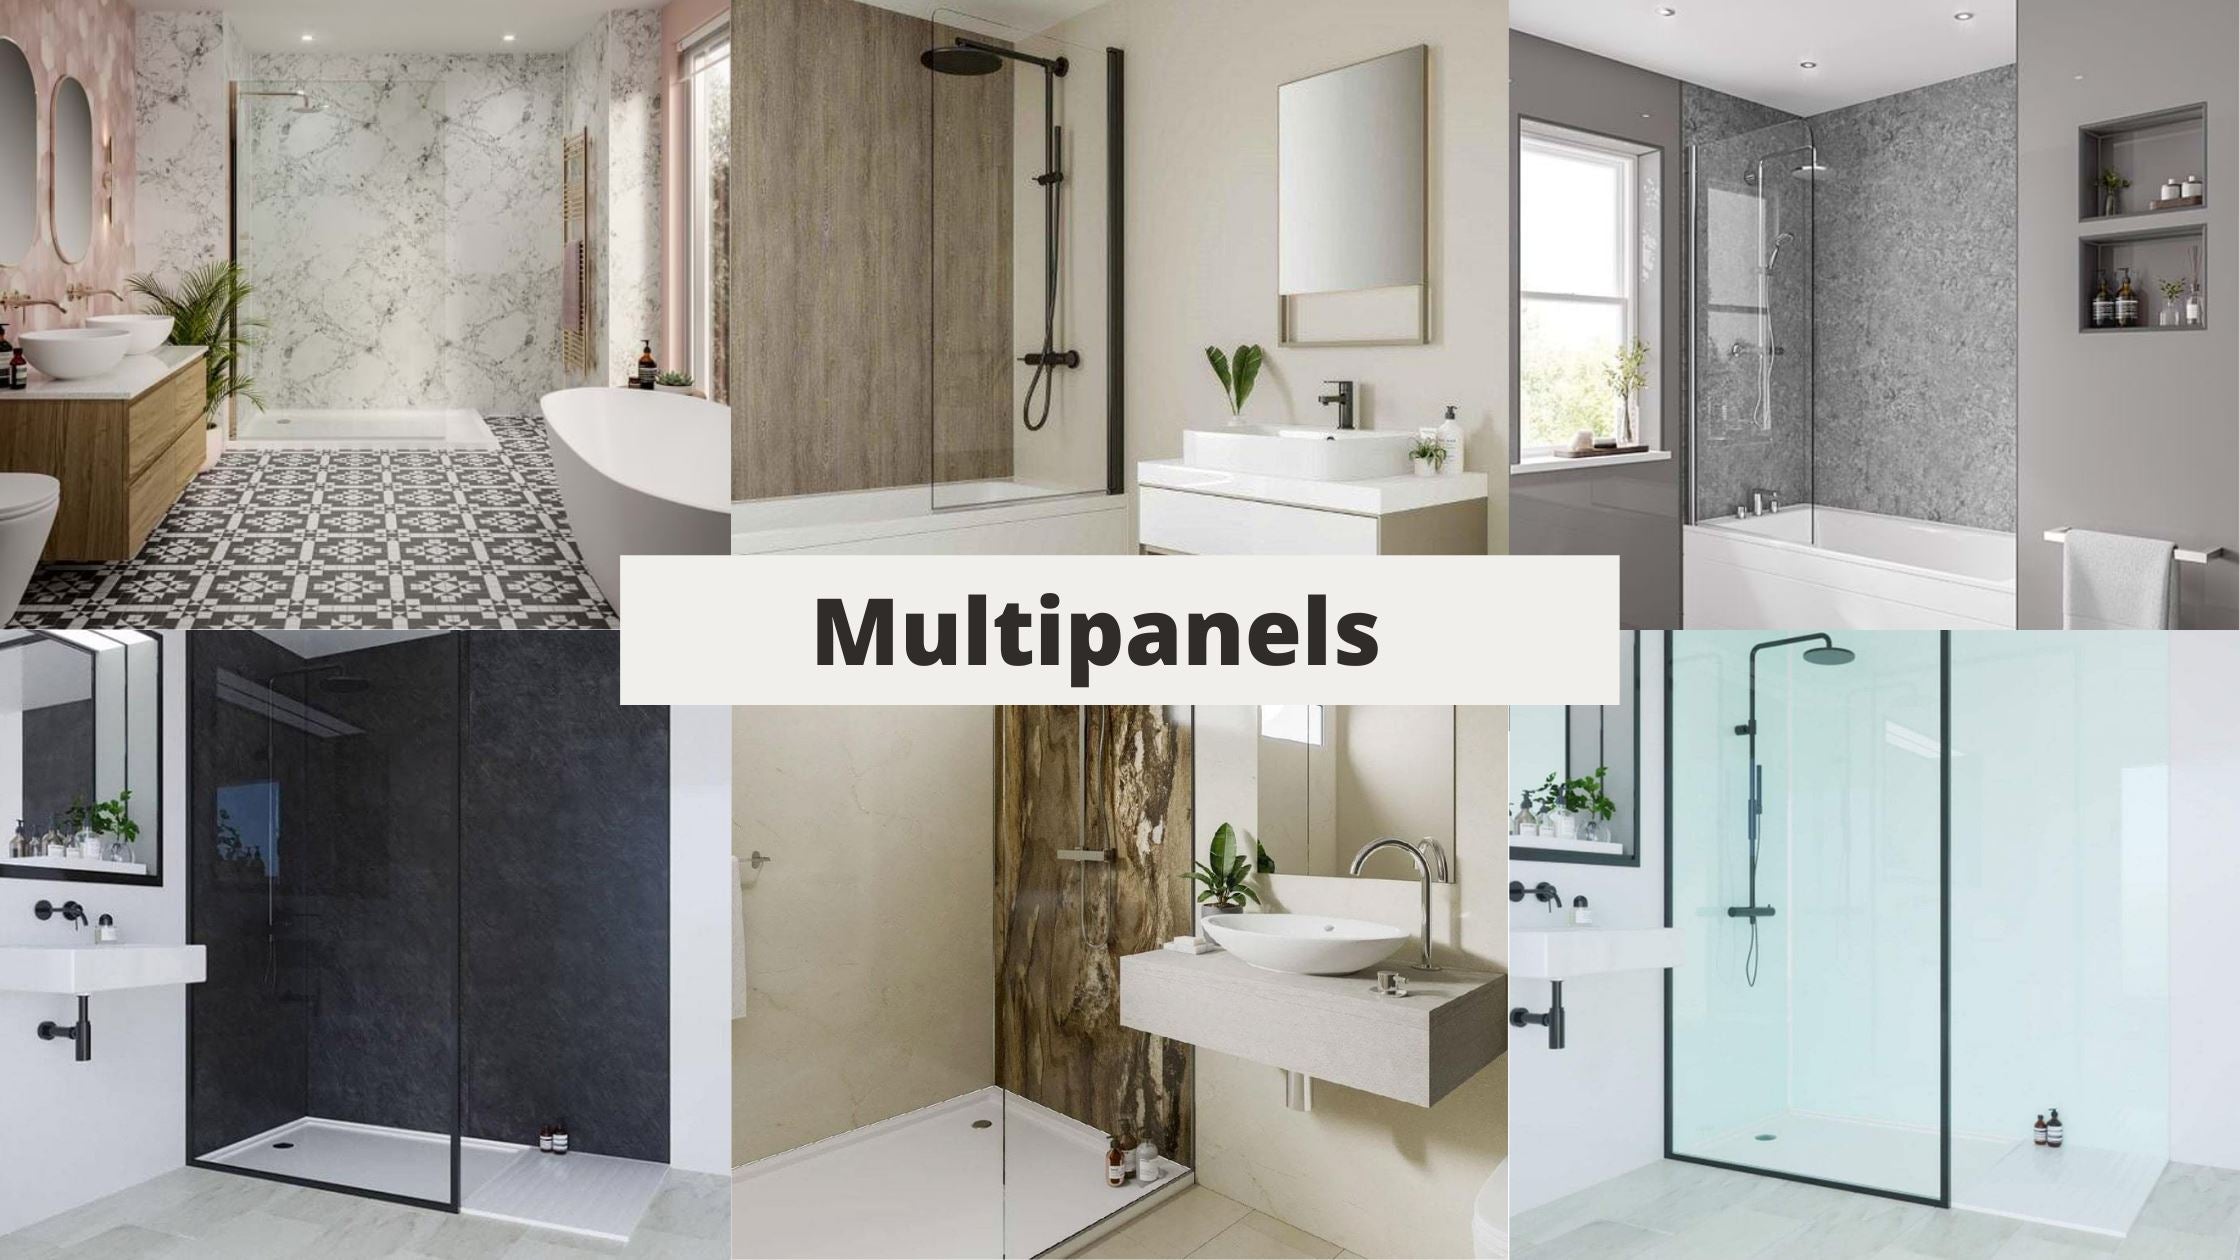 Introducing Multipanels